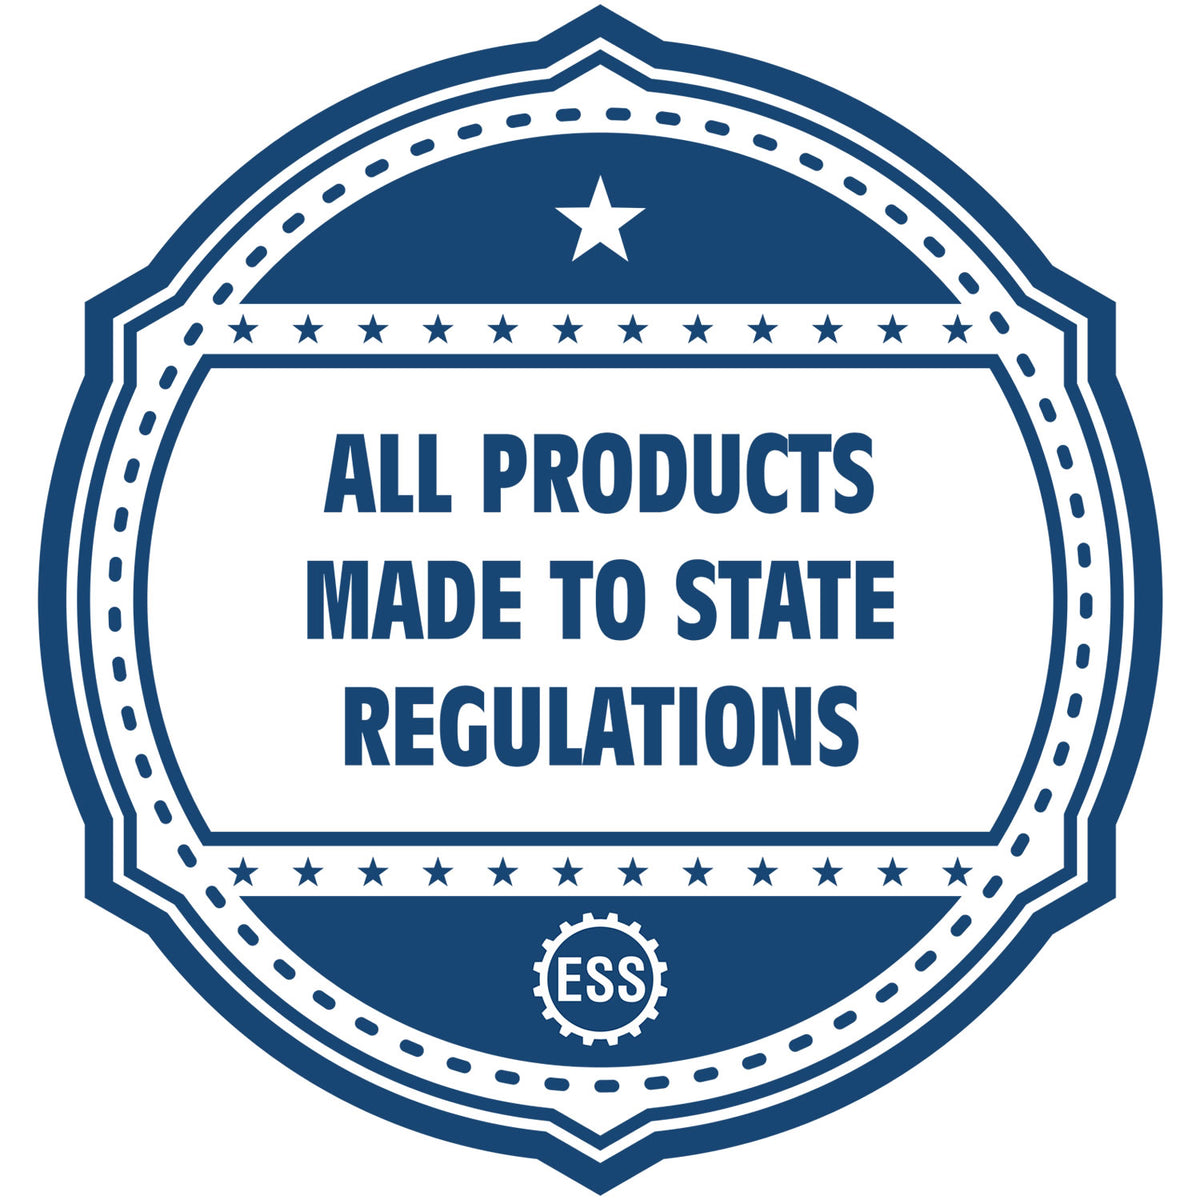 A blue icon or badge for the Gift Virginia Landscape Architect Seal showing that this product is made in compliance with state regulations.